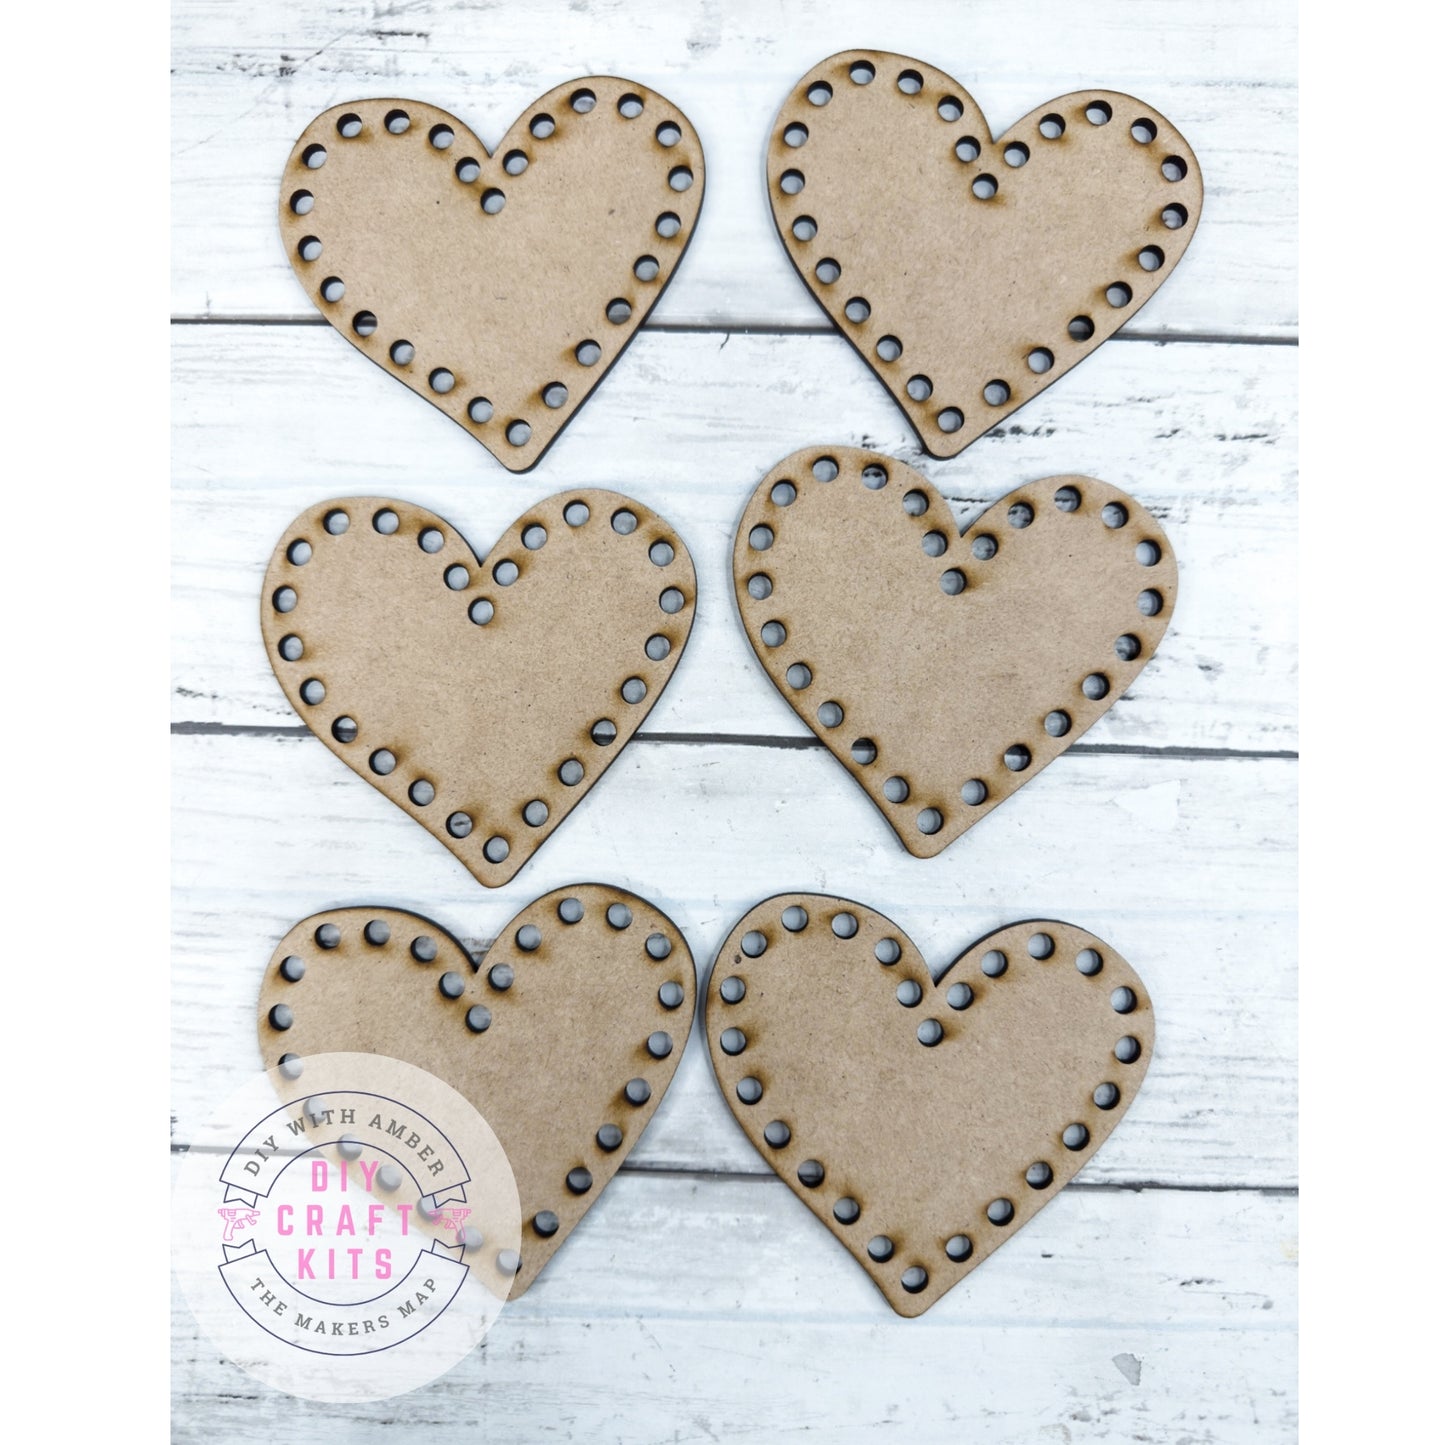 6 Lacing Cross Stitch Hearts Cut Outs DIY Kit